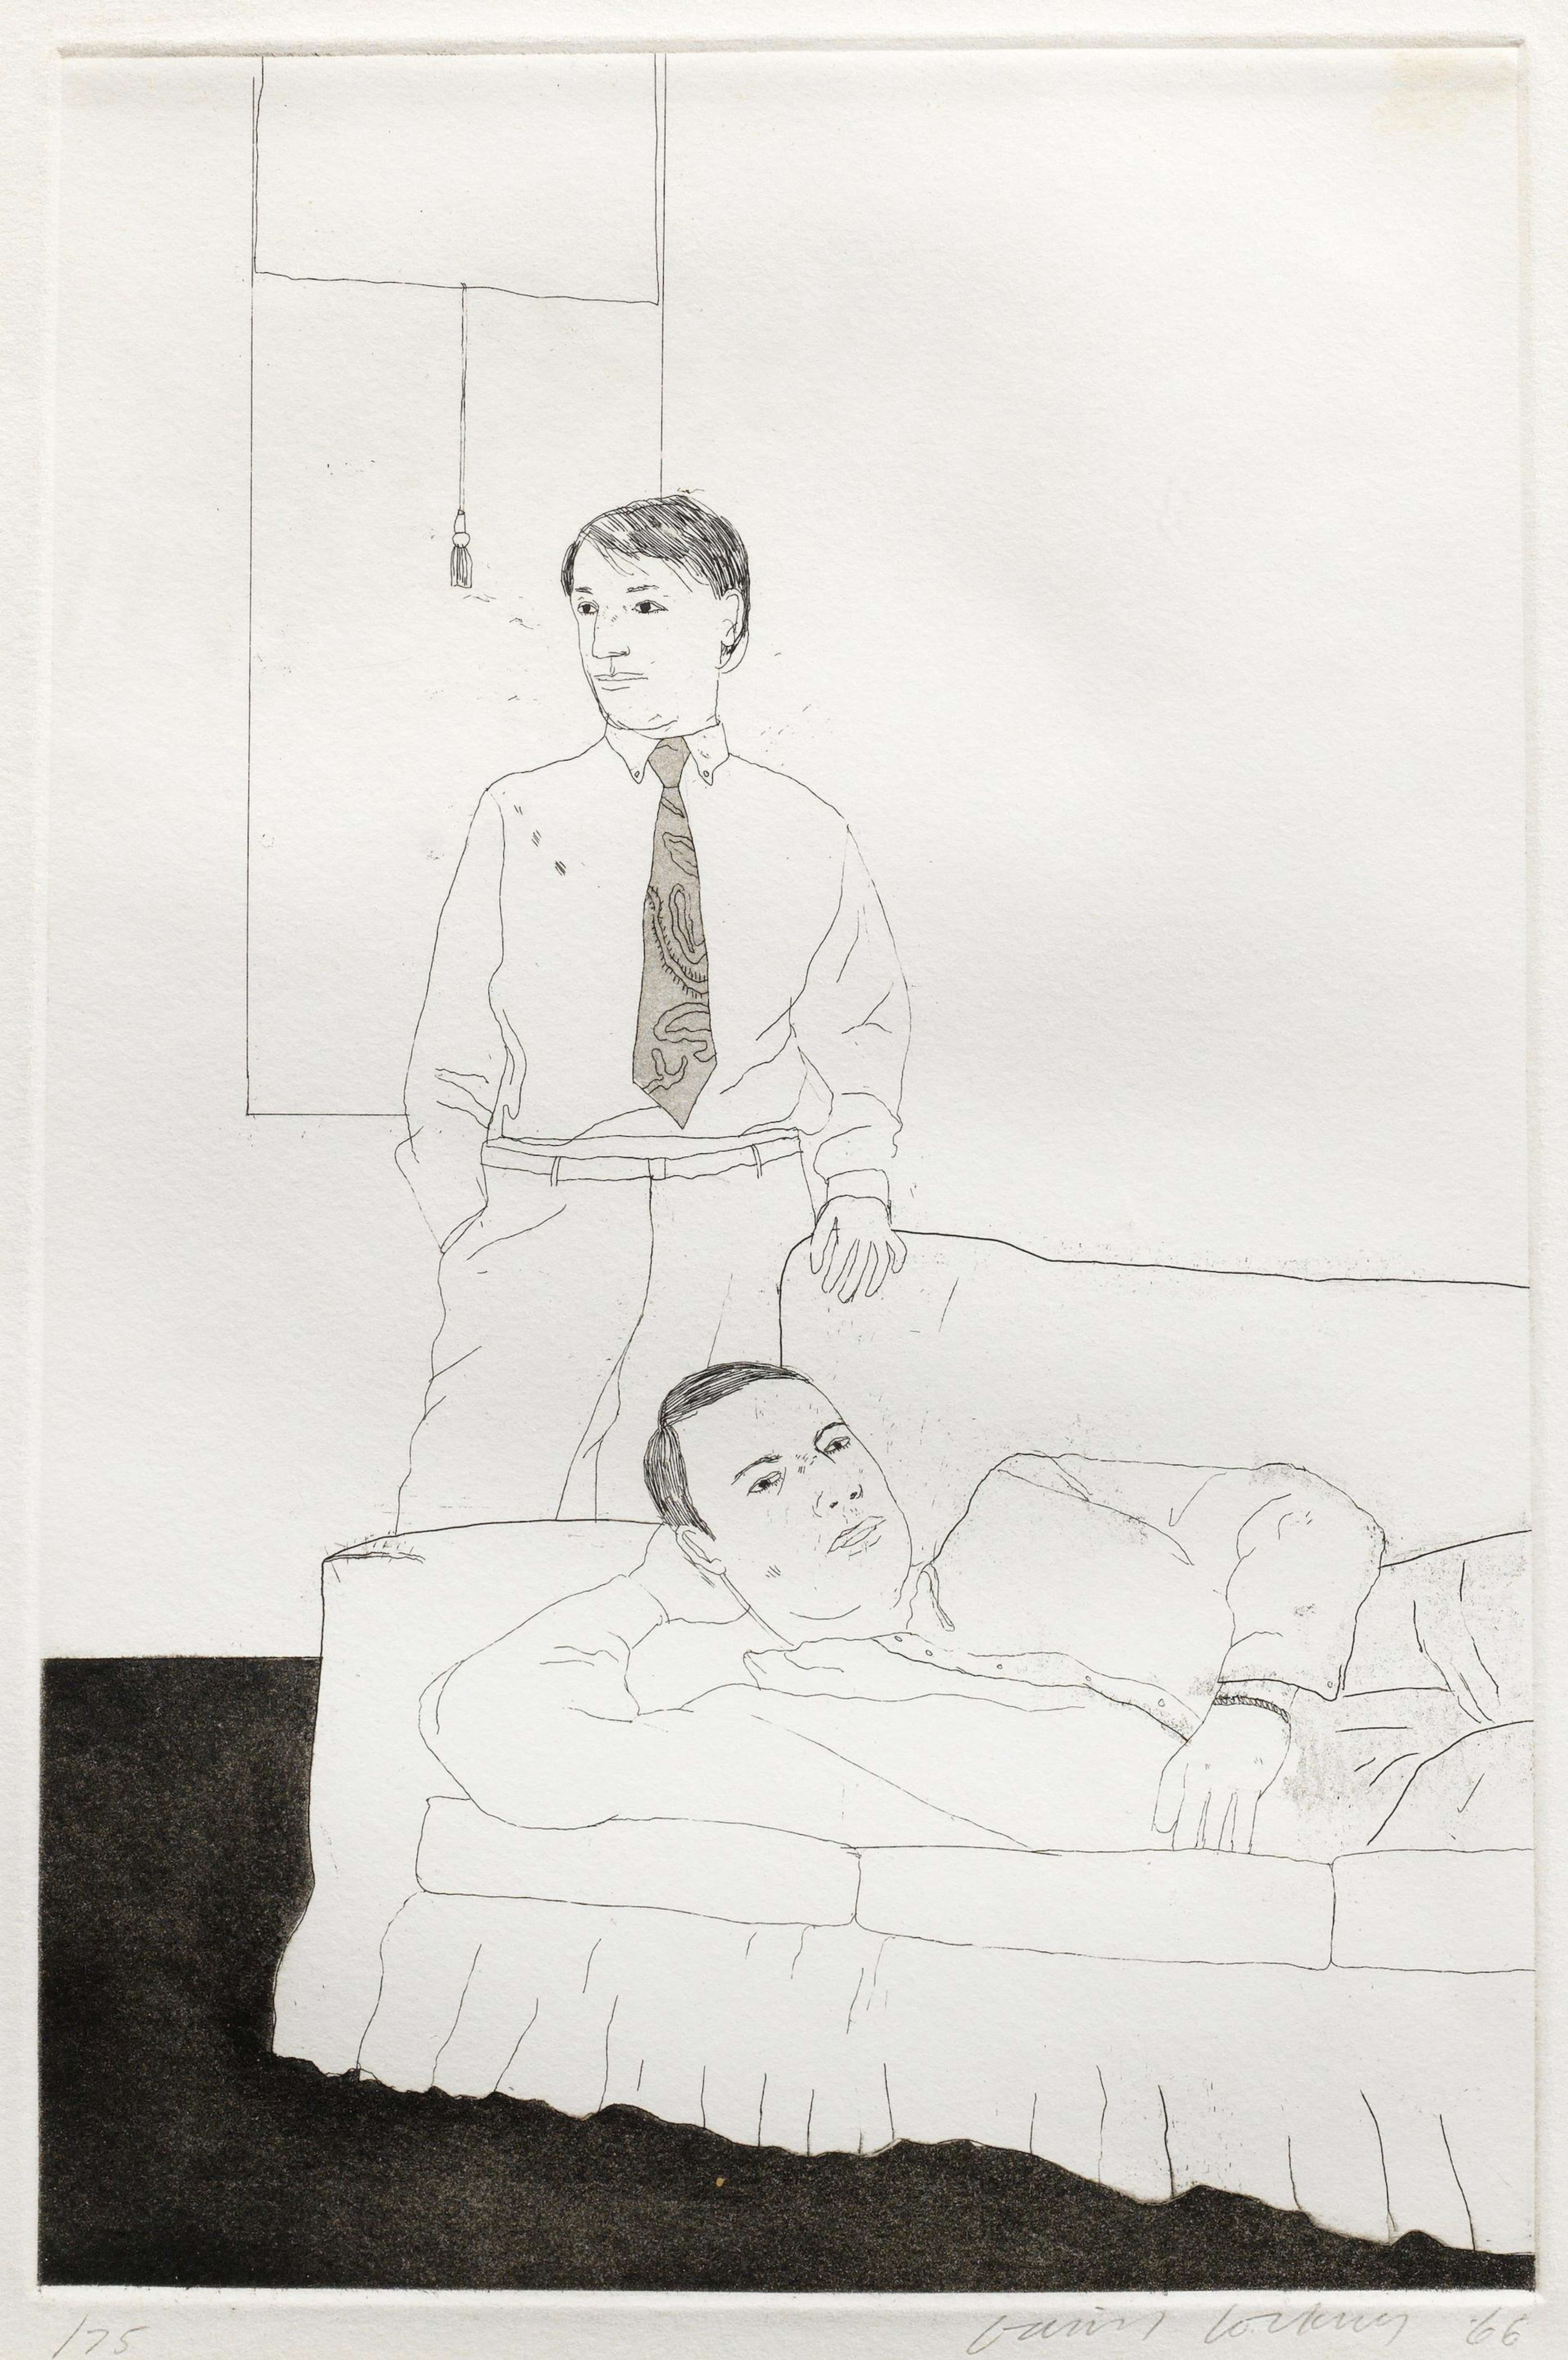 David Hockney’s Beautiful And White Flowers. An etching of a man lying down on a sofa with another male standing up next to him at the edge of the sofa. 